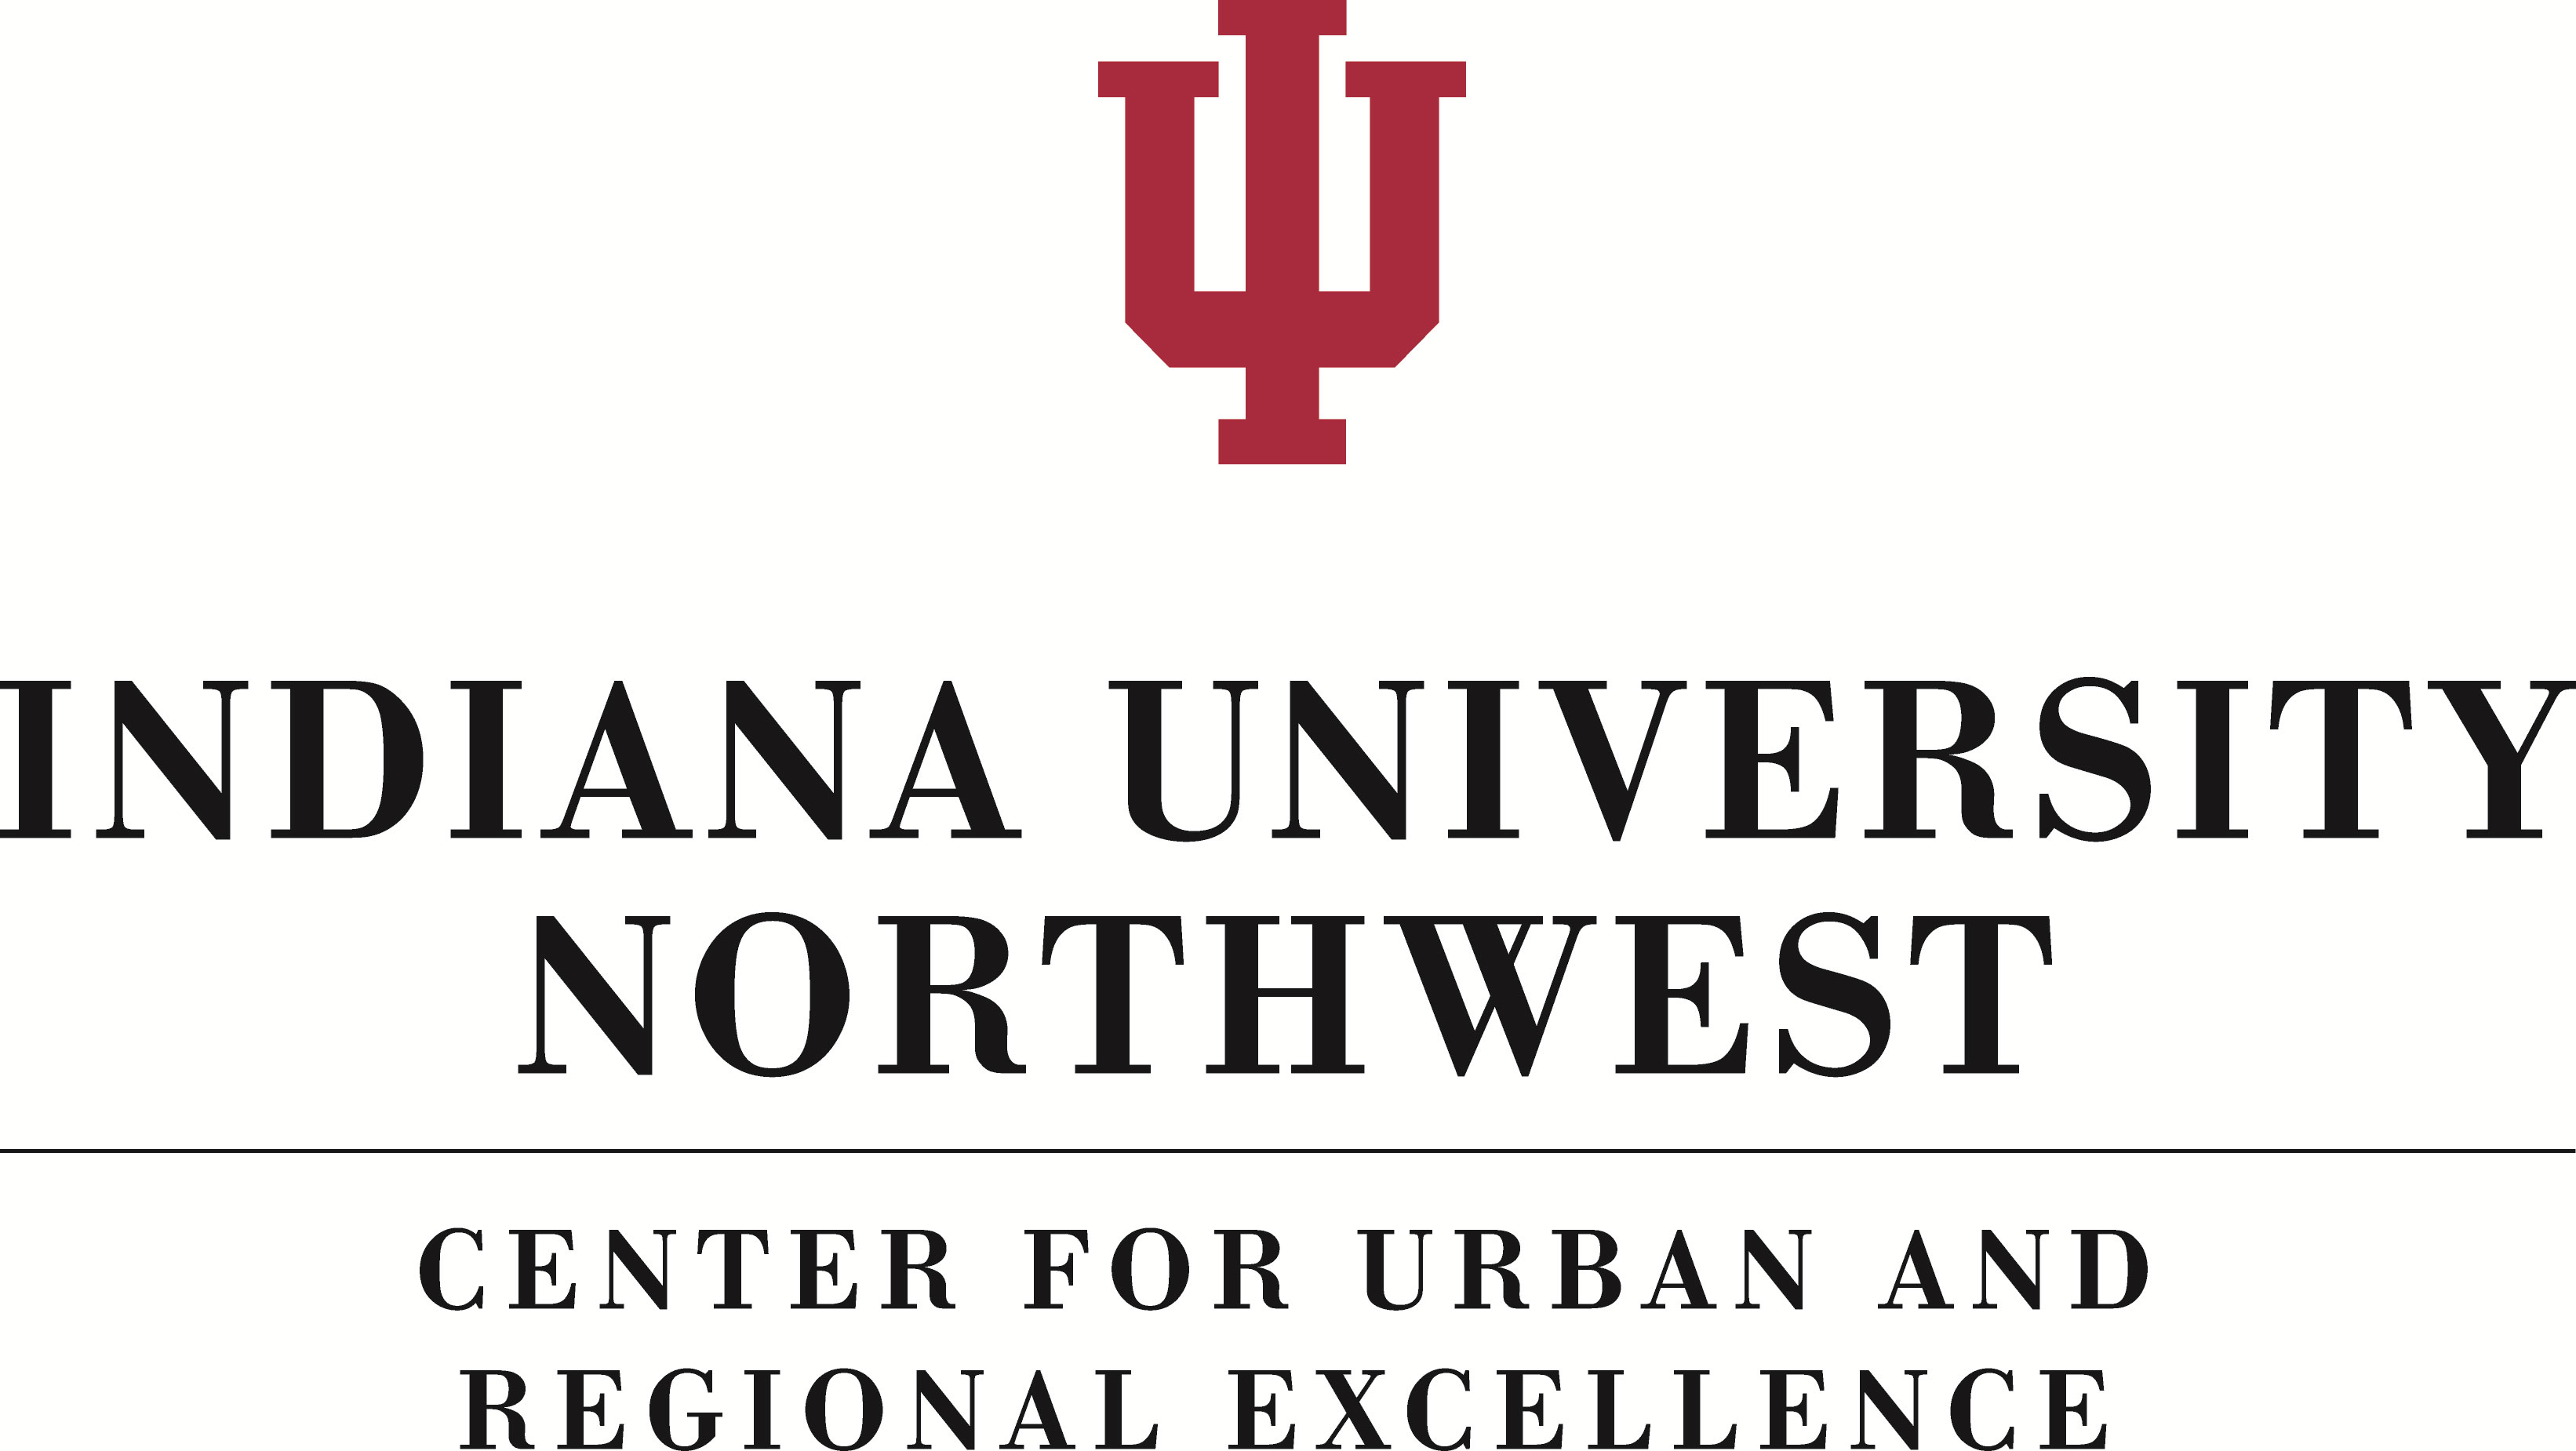 Indiana University Northwest Center for Urban and Regional Excellence